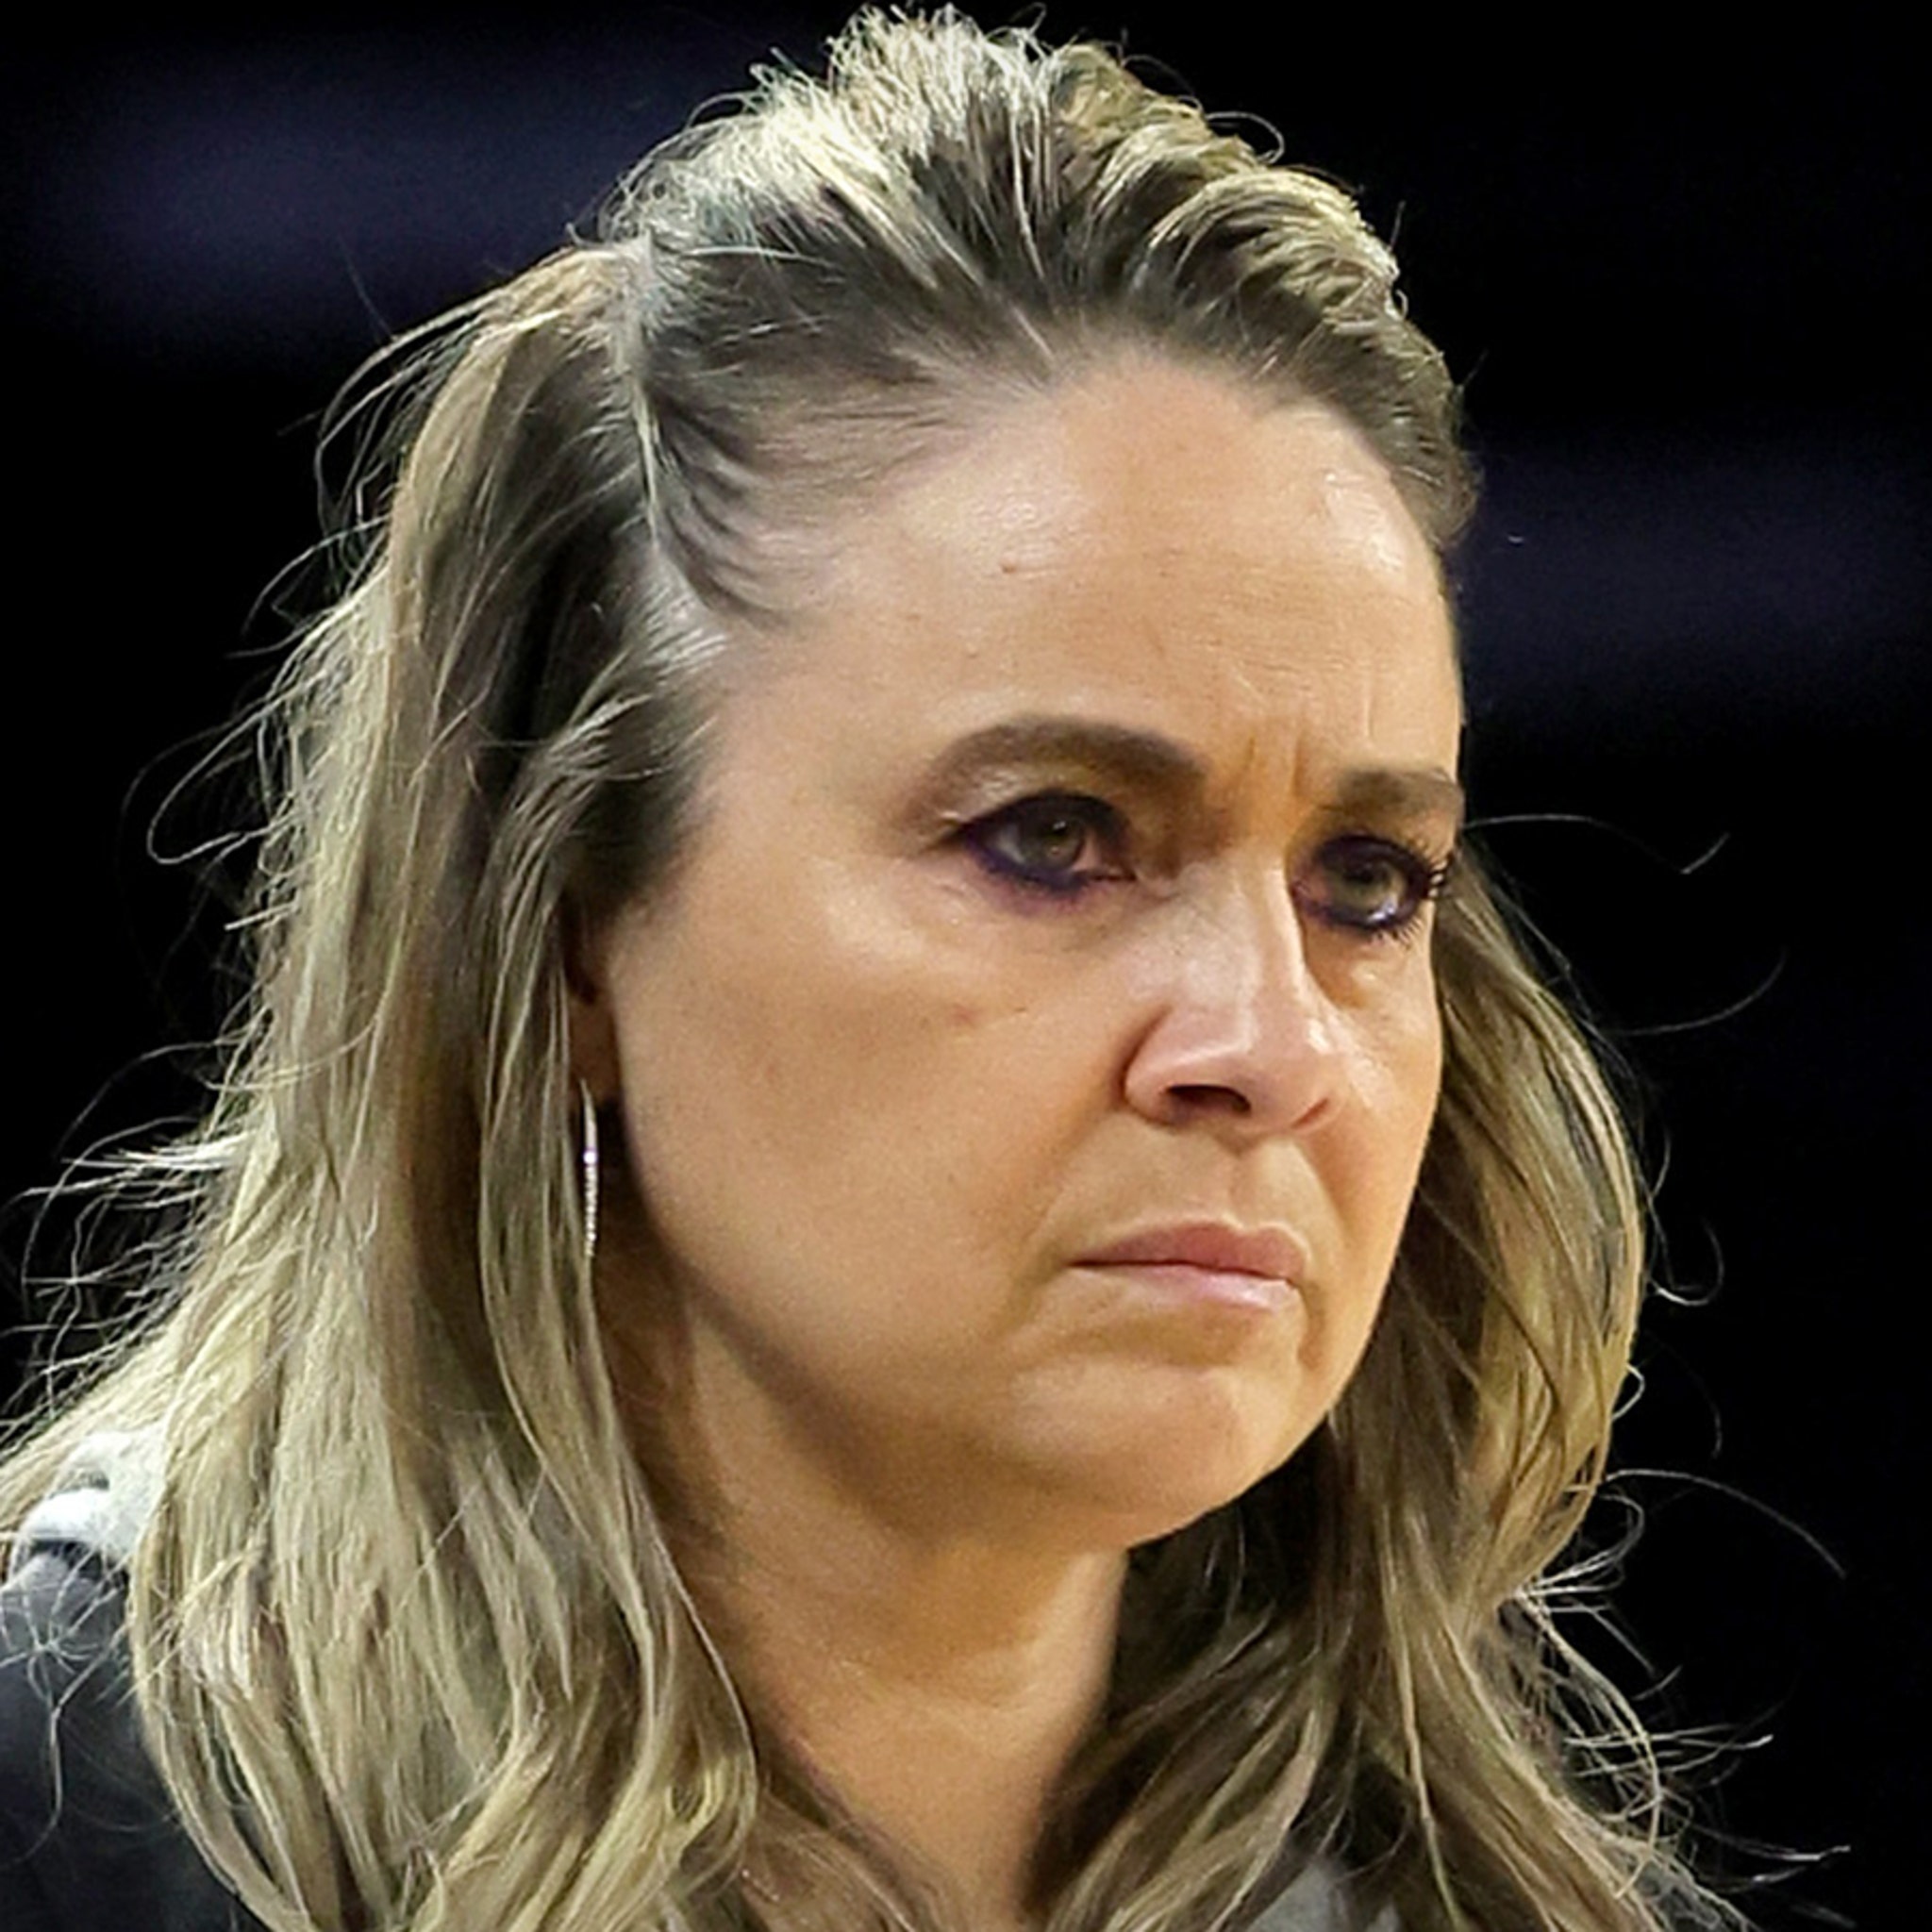 WNBA Suspends Becky Hammon 2 Games For Comments About Players Pregnancy pic